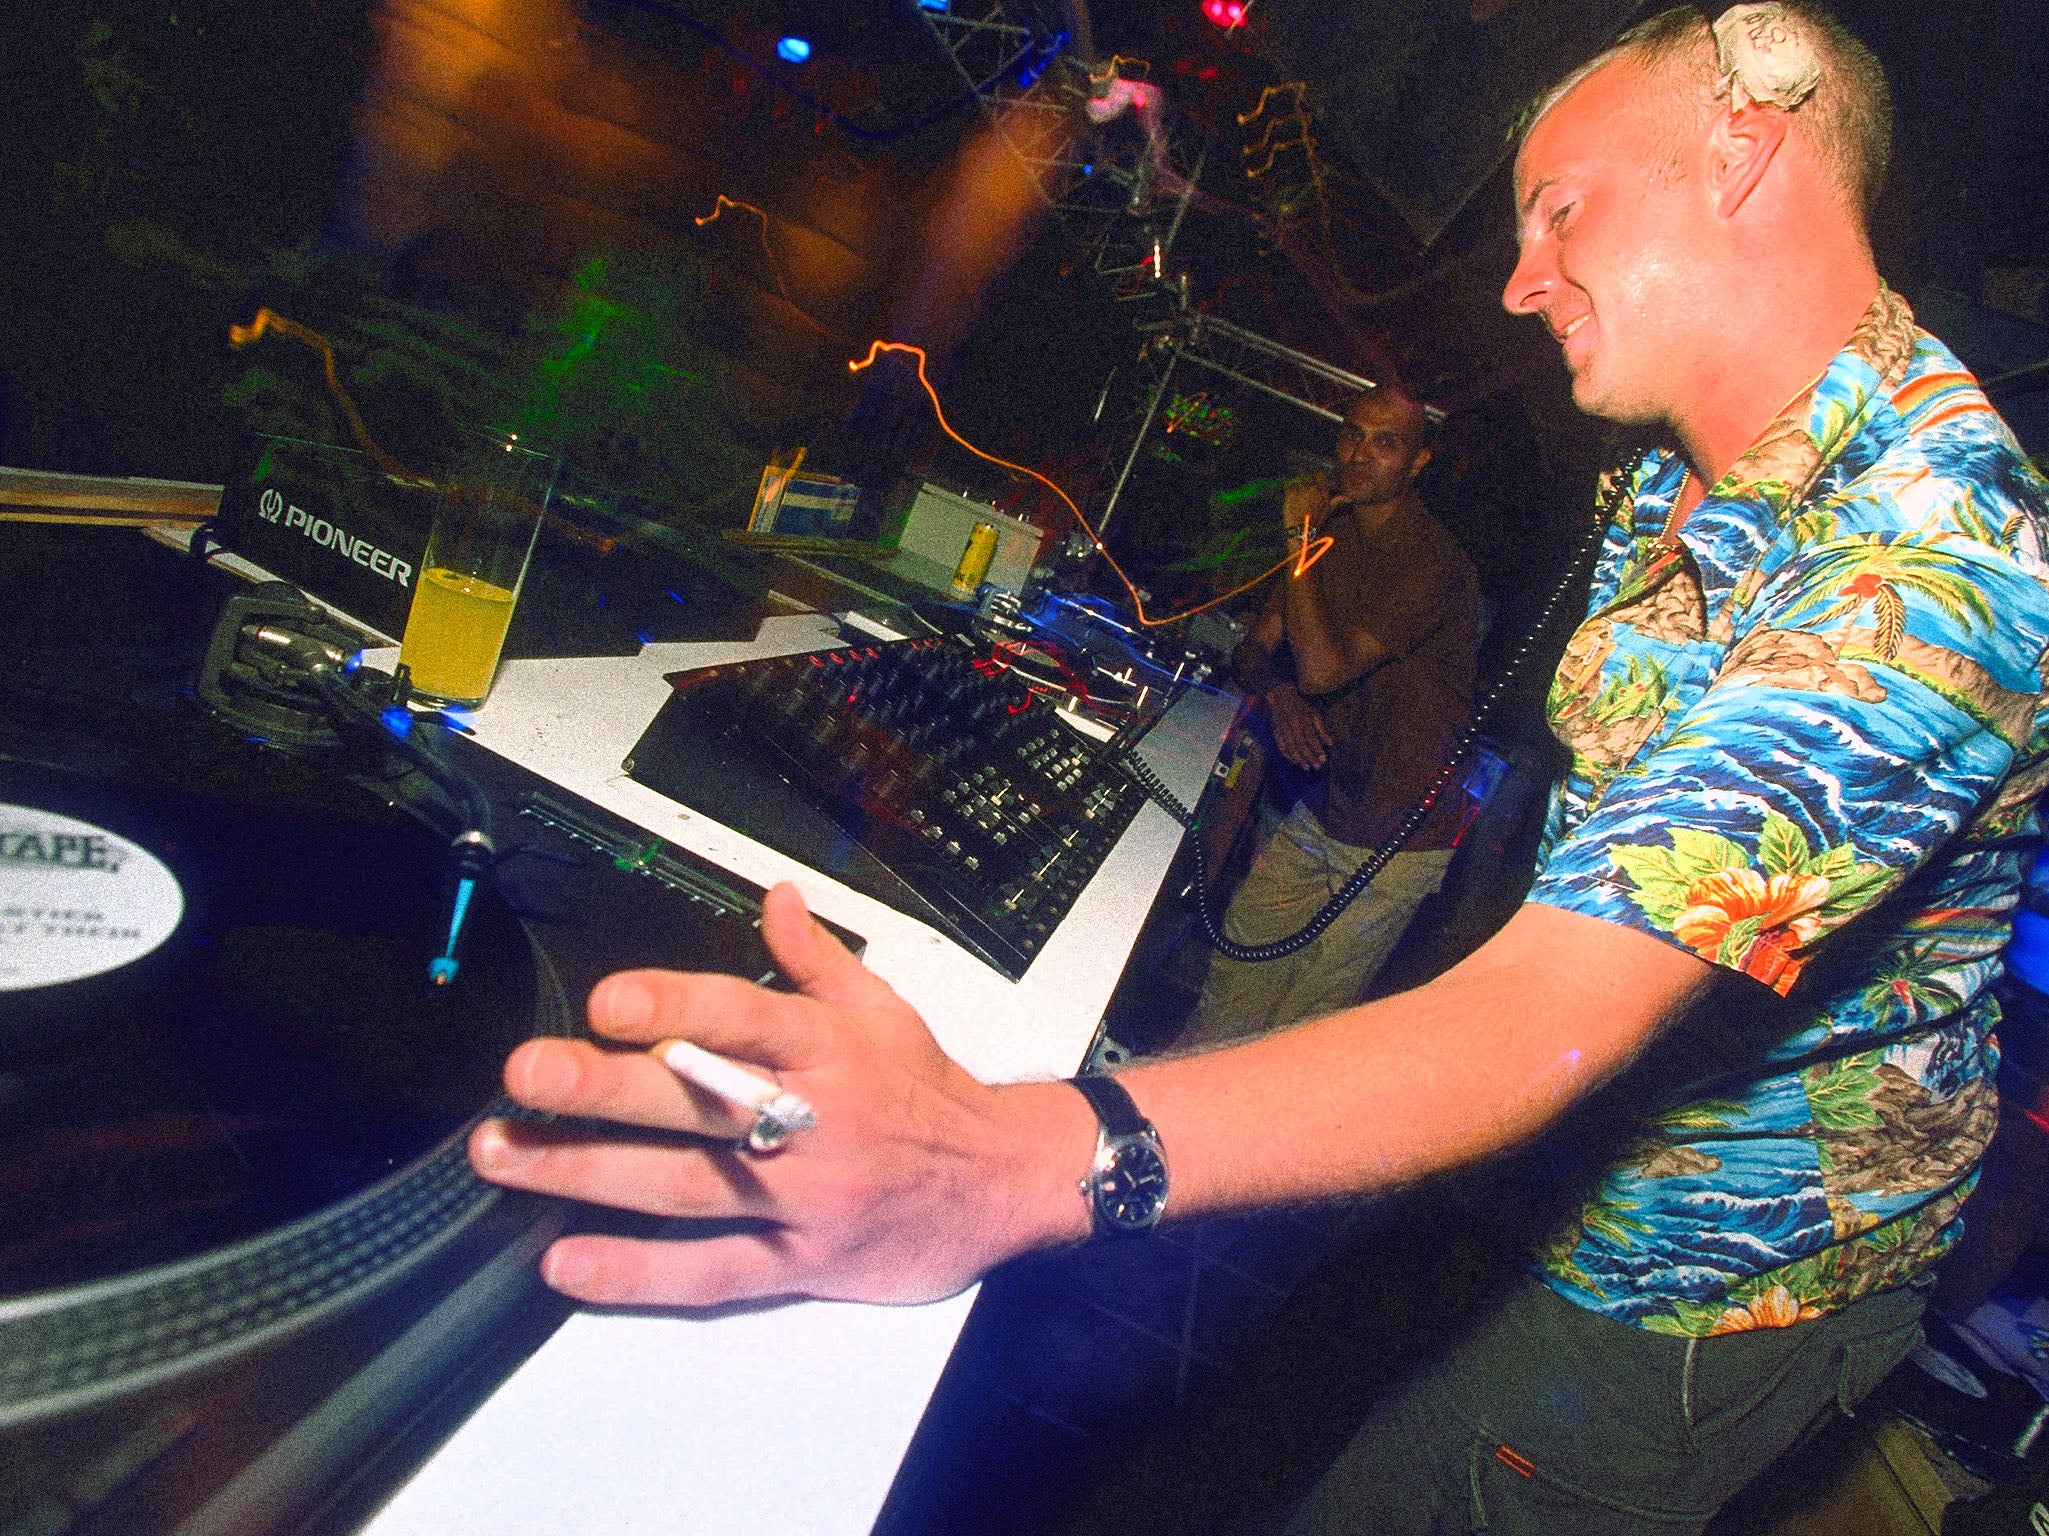 DJ Norman Cook, aka Fatboy Slim, at the decks in Ibiza during the Noughties